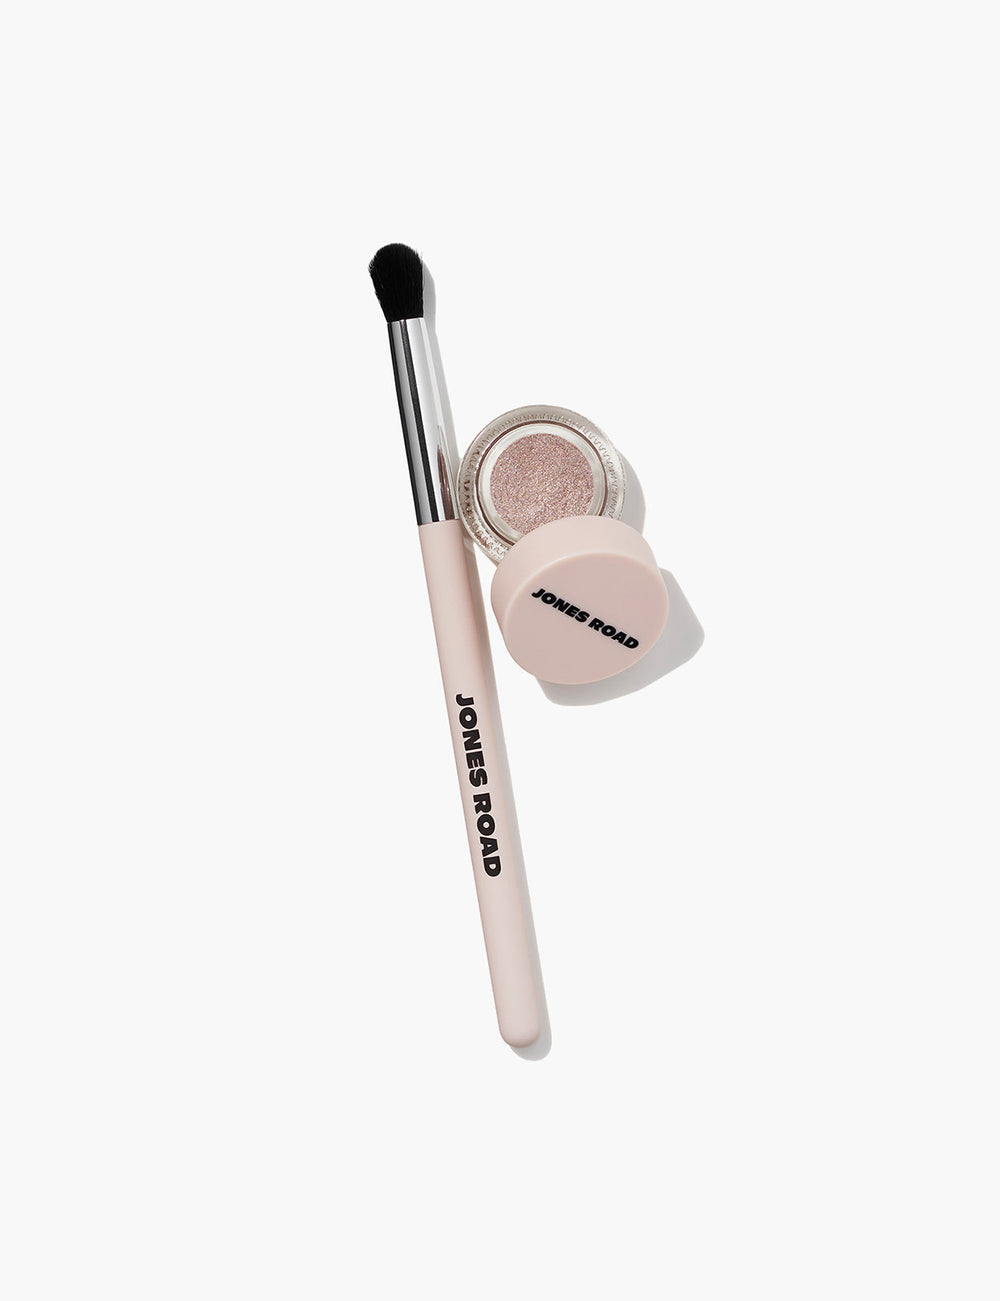 The Eye Blending Brush and Just A Sec by Jones Road Beauty